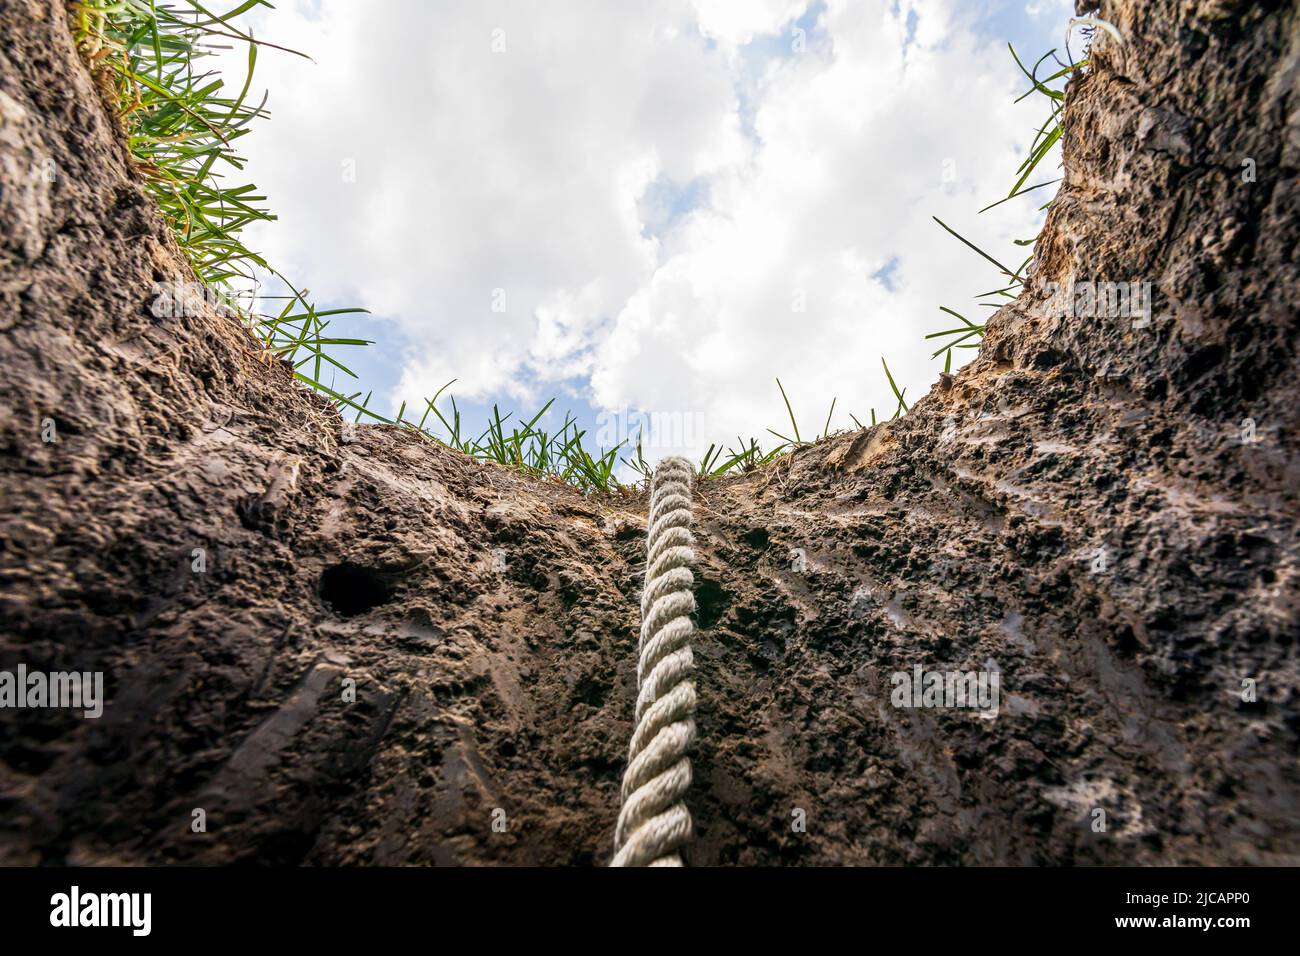 Looking up from hole in ground with rope. Lifeline, debt, mental health help concept. Stock Photo